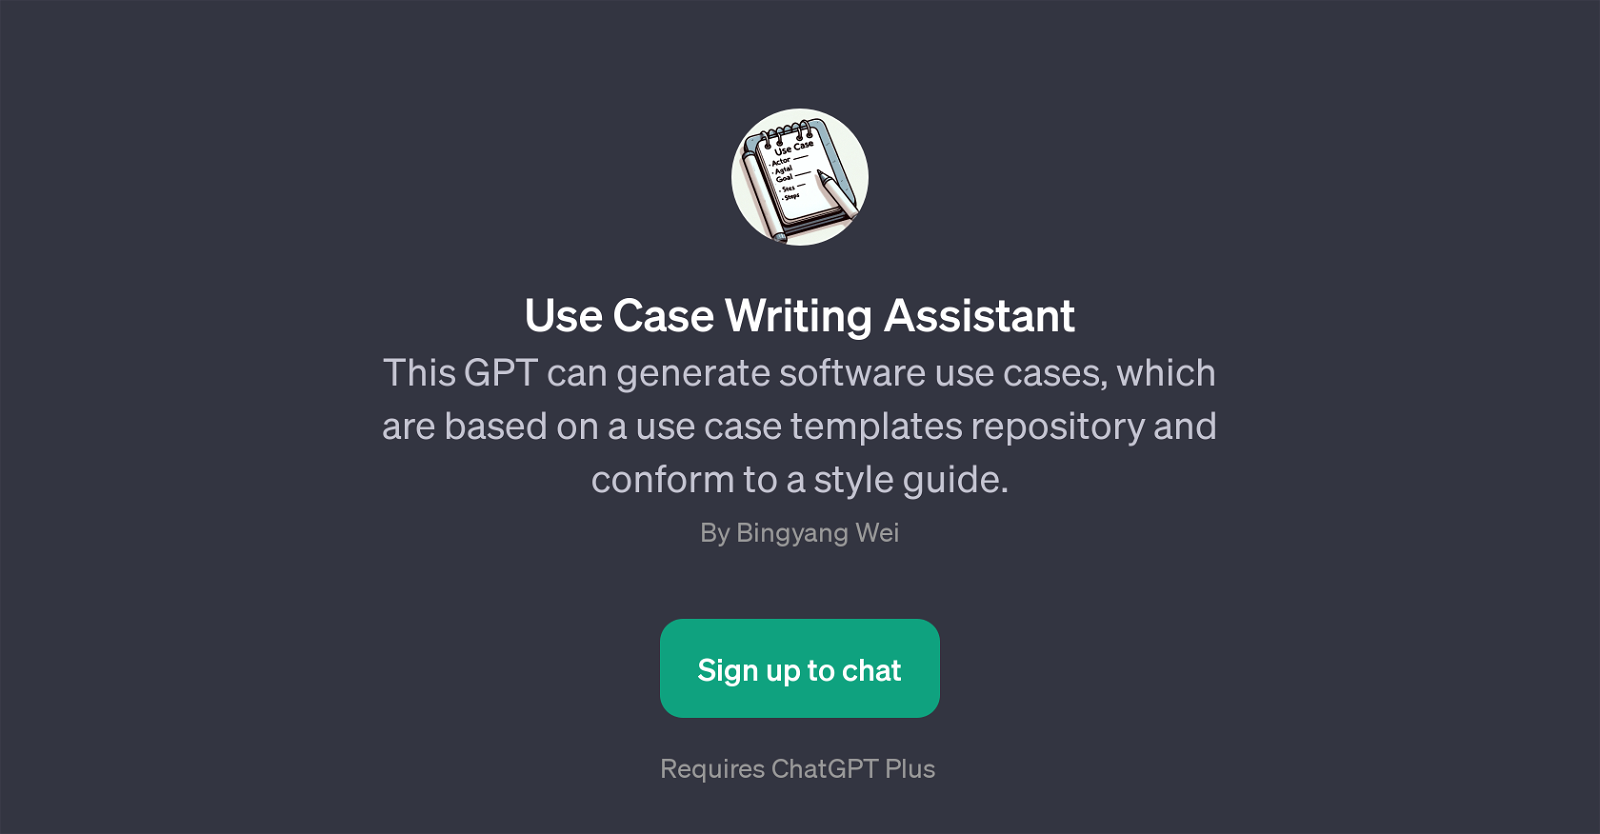 Use Case Writing Assistant website